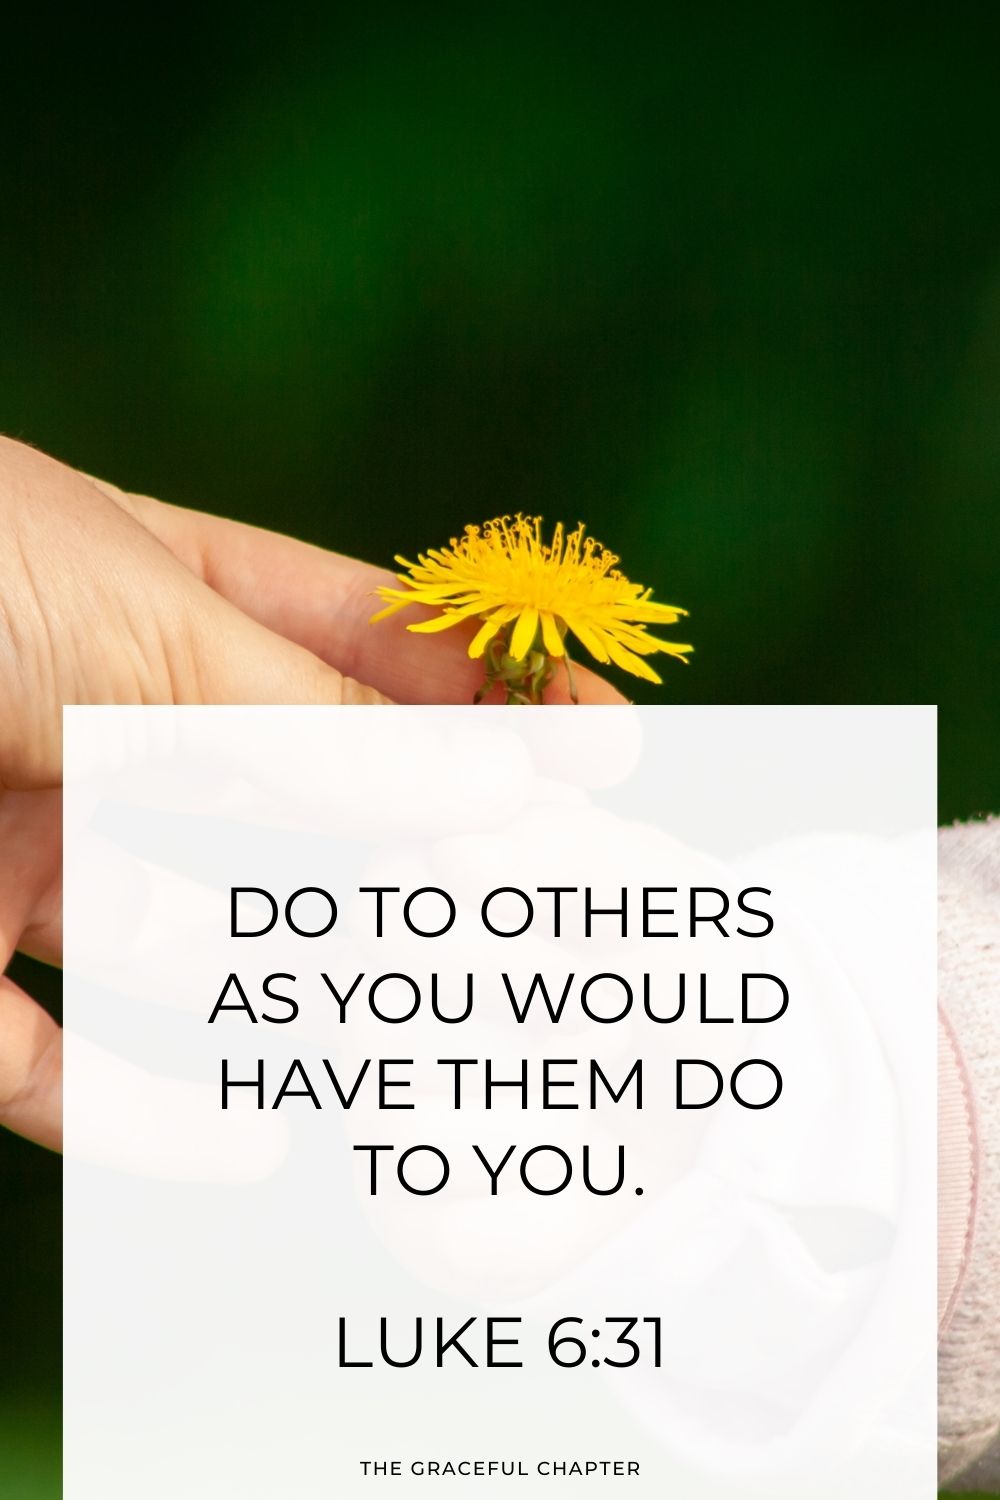 Do to others as you would have them do to you. Luke 6:31